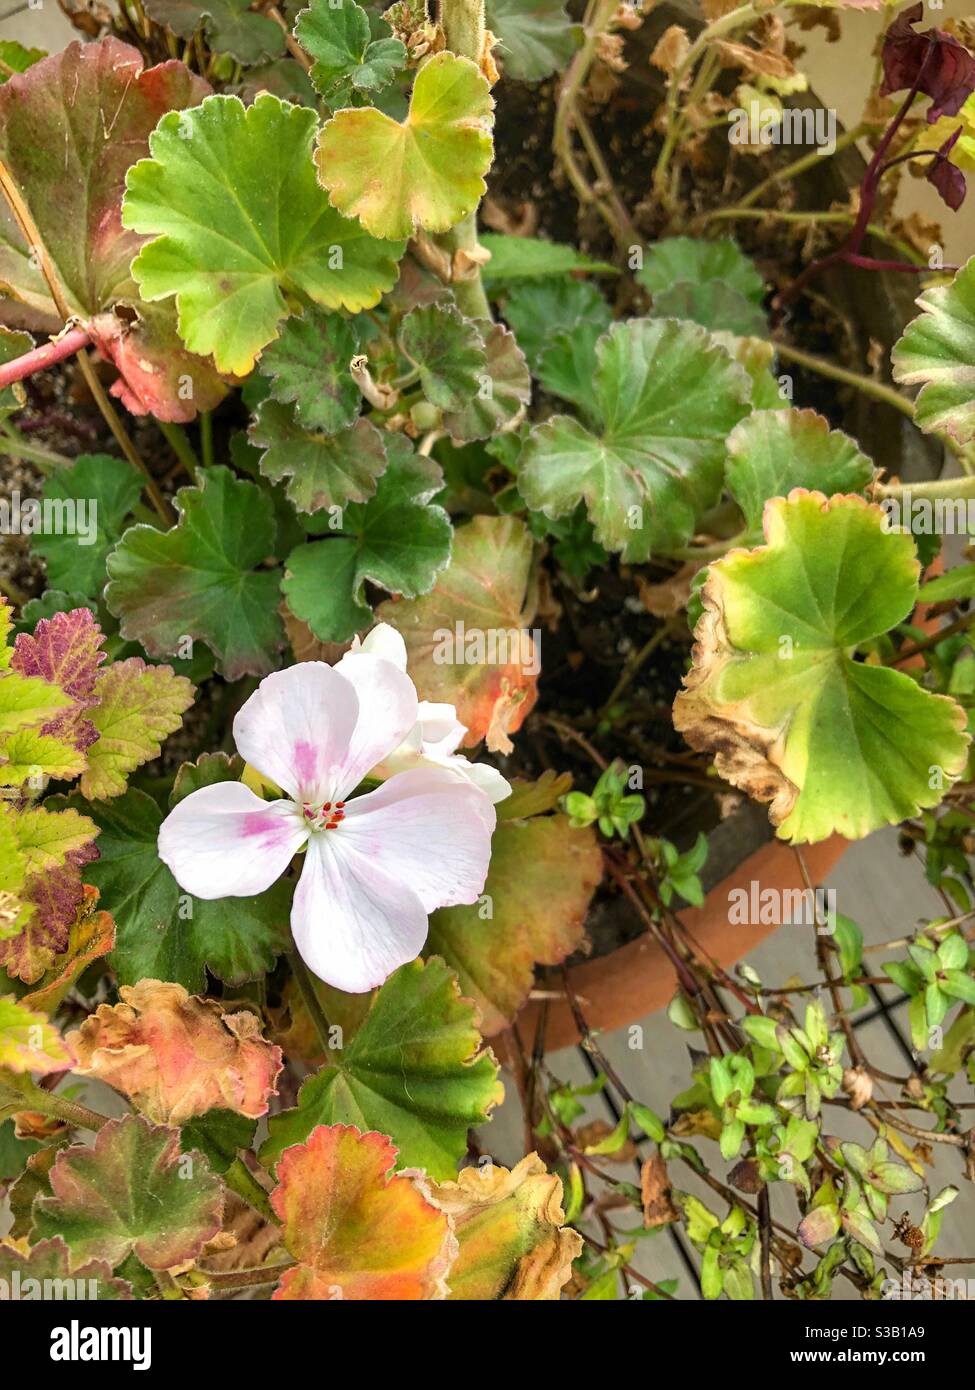 A single autumn bloom remains. Stock Photo